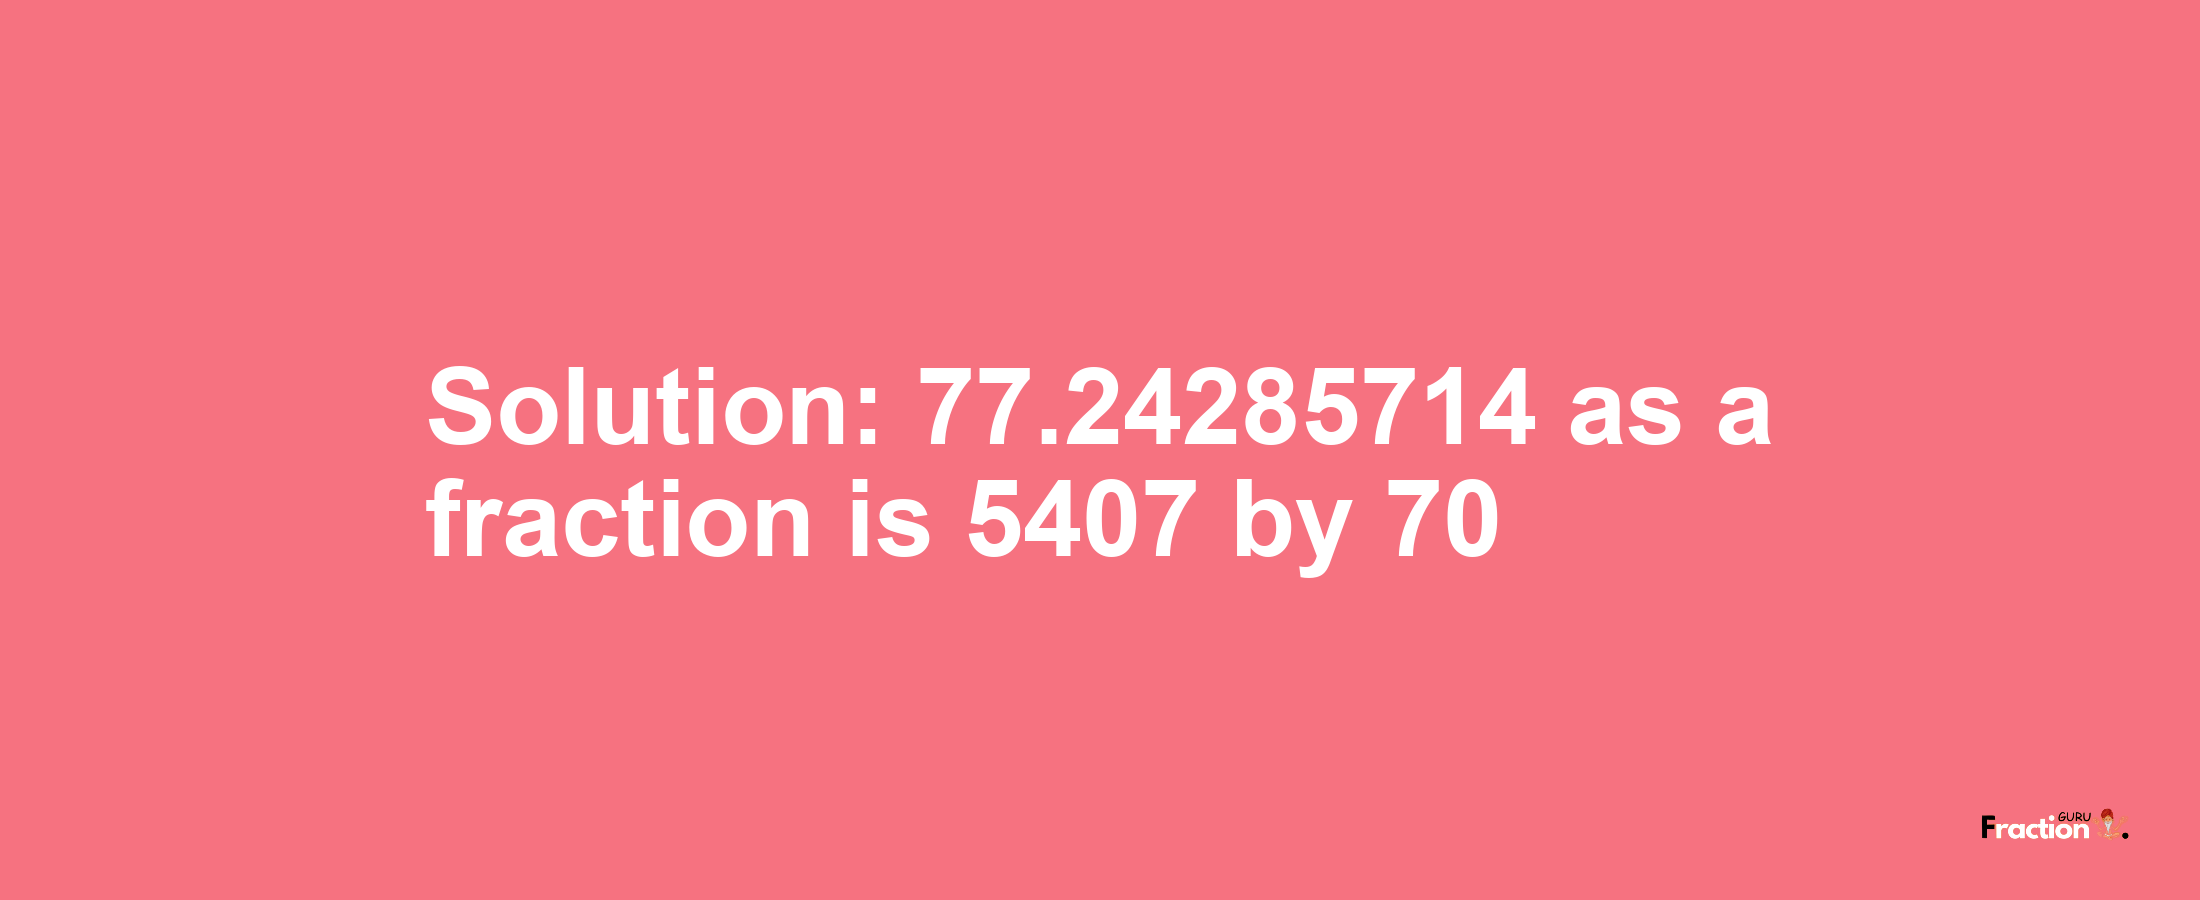 Solution:77.24285714 as a fraction is 5407/70